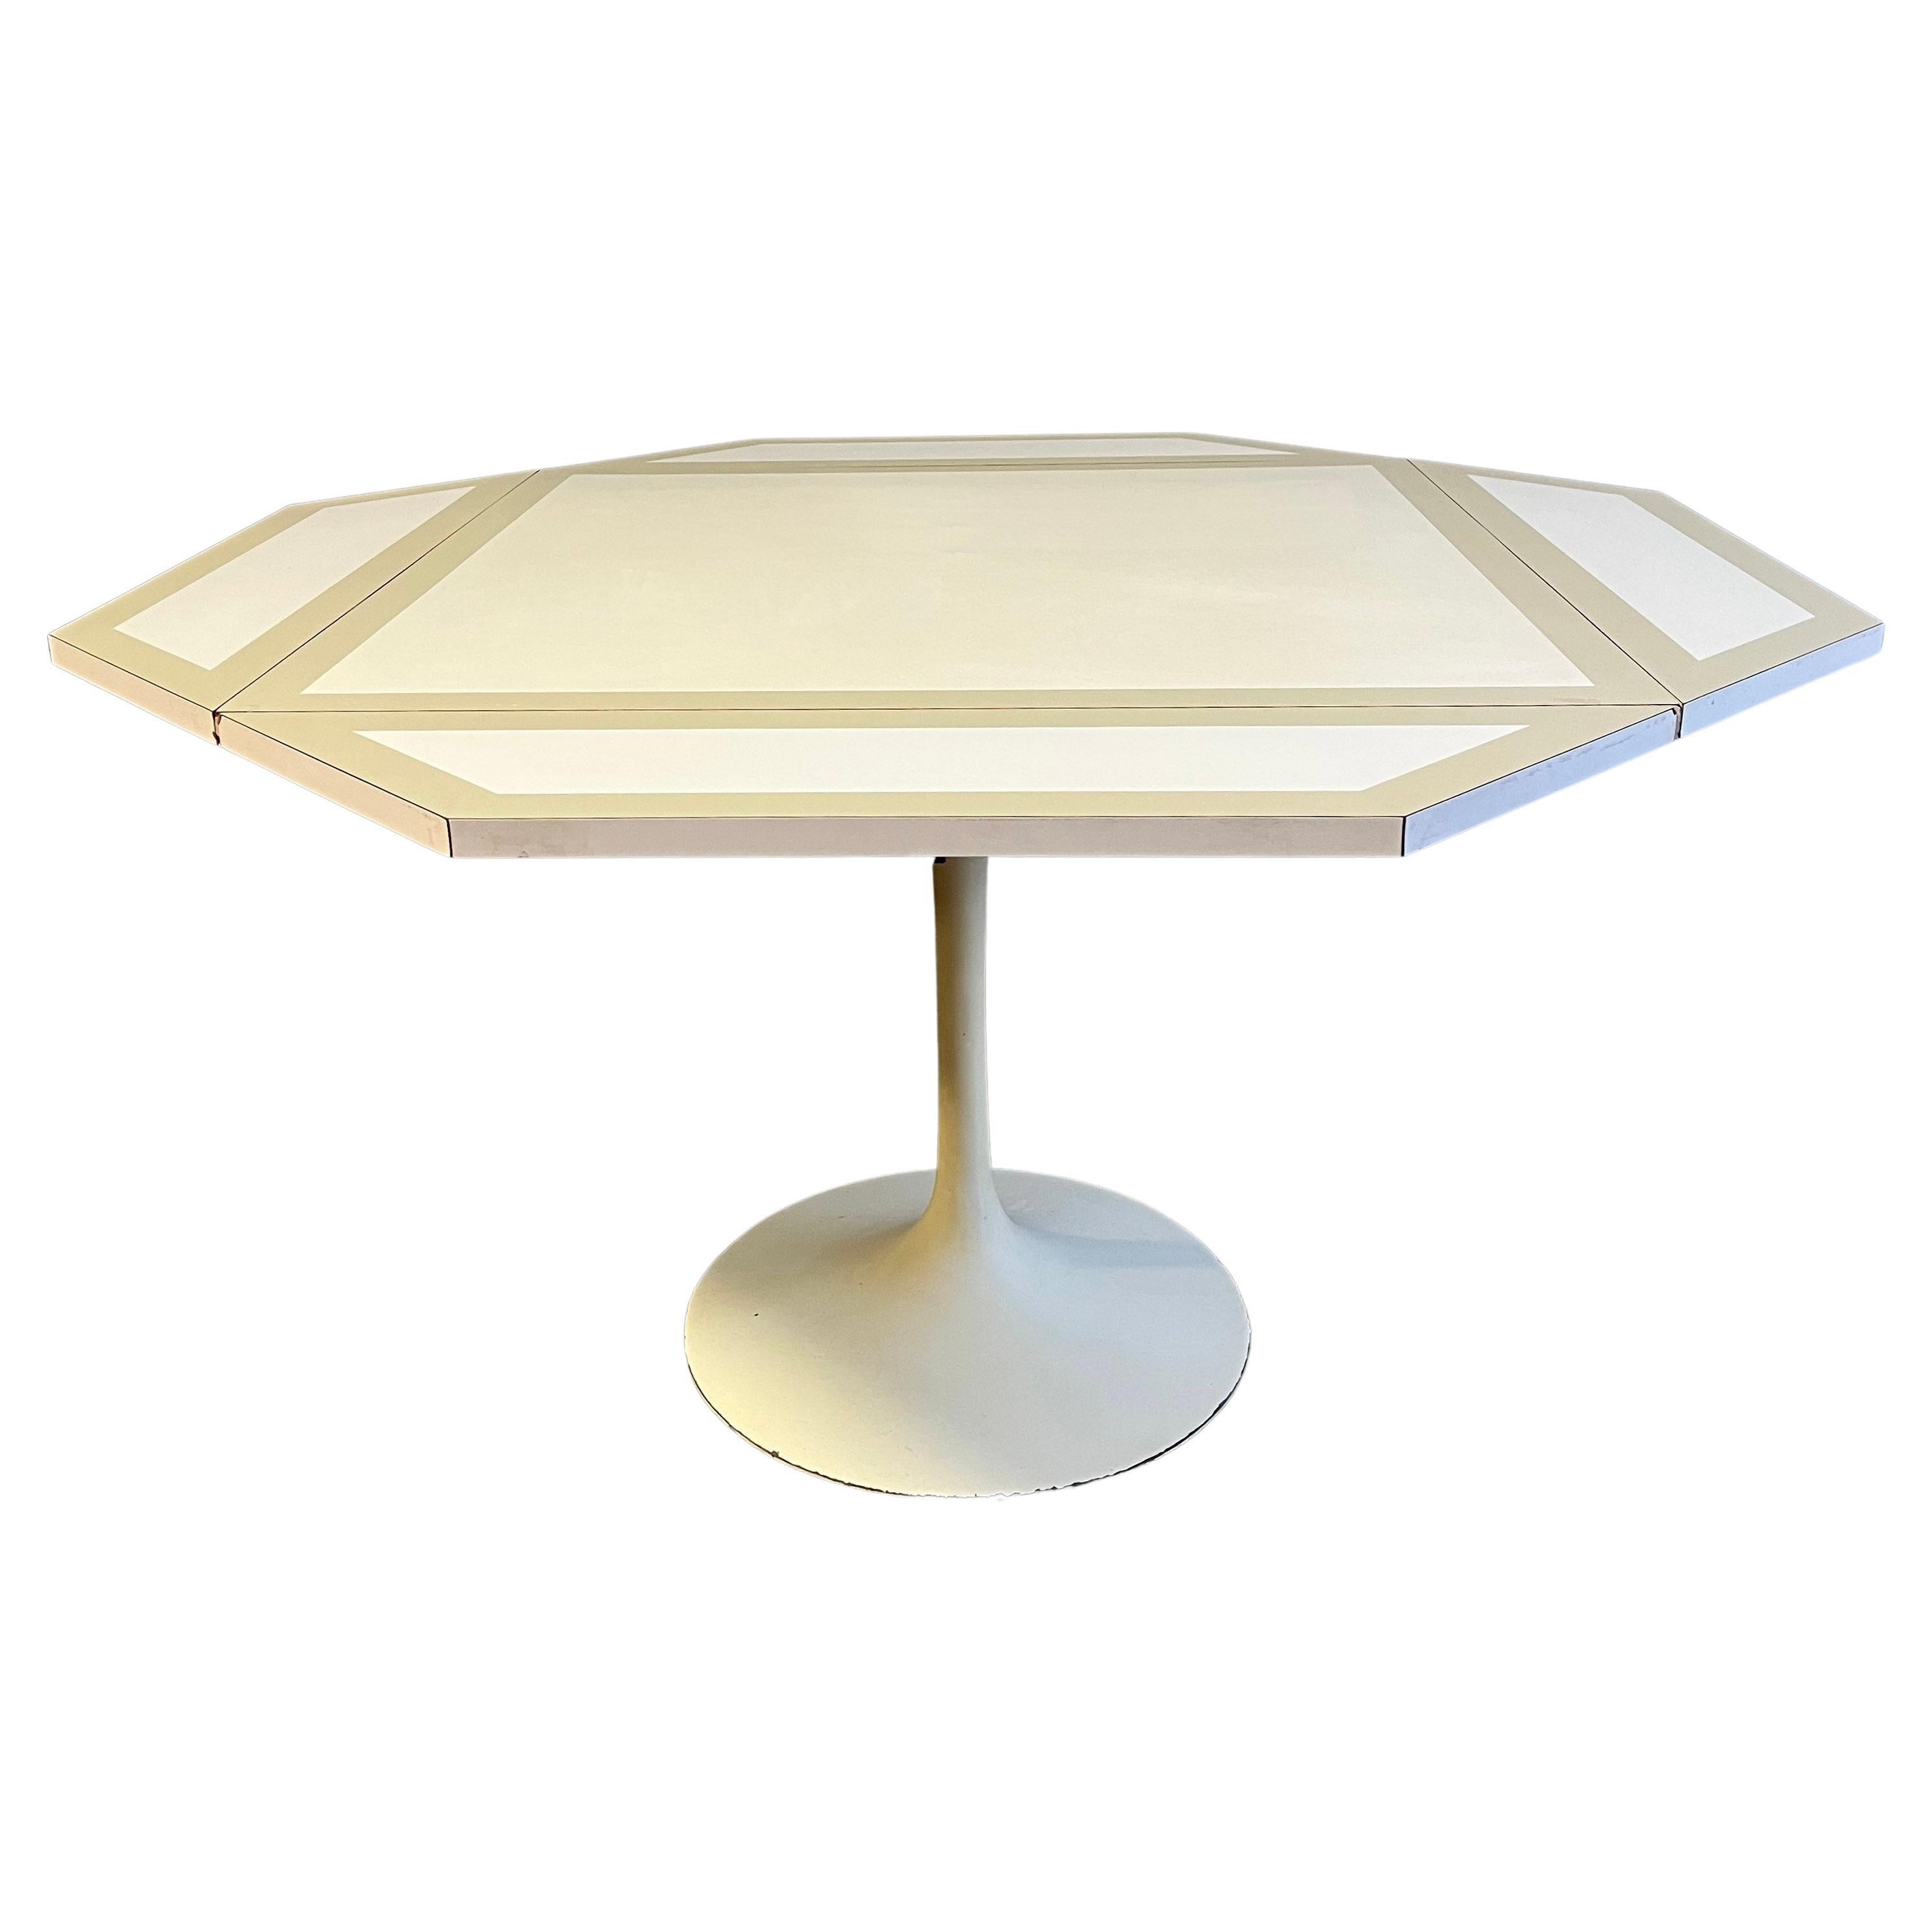 Alexander Girard Table for The Dragon Peak House For Sale